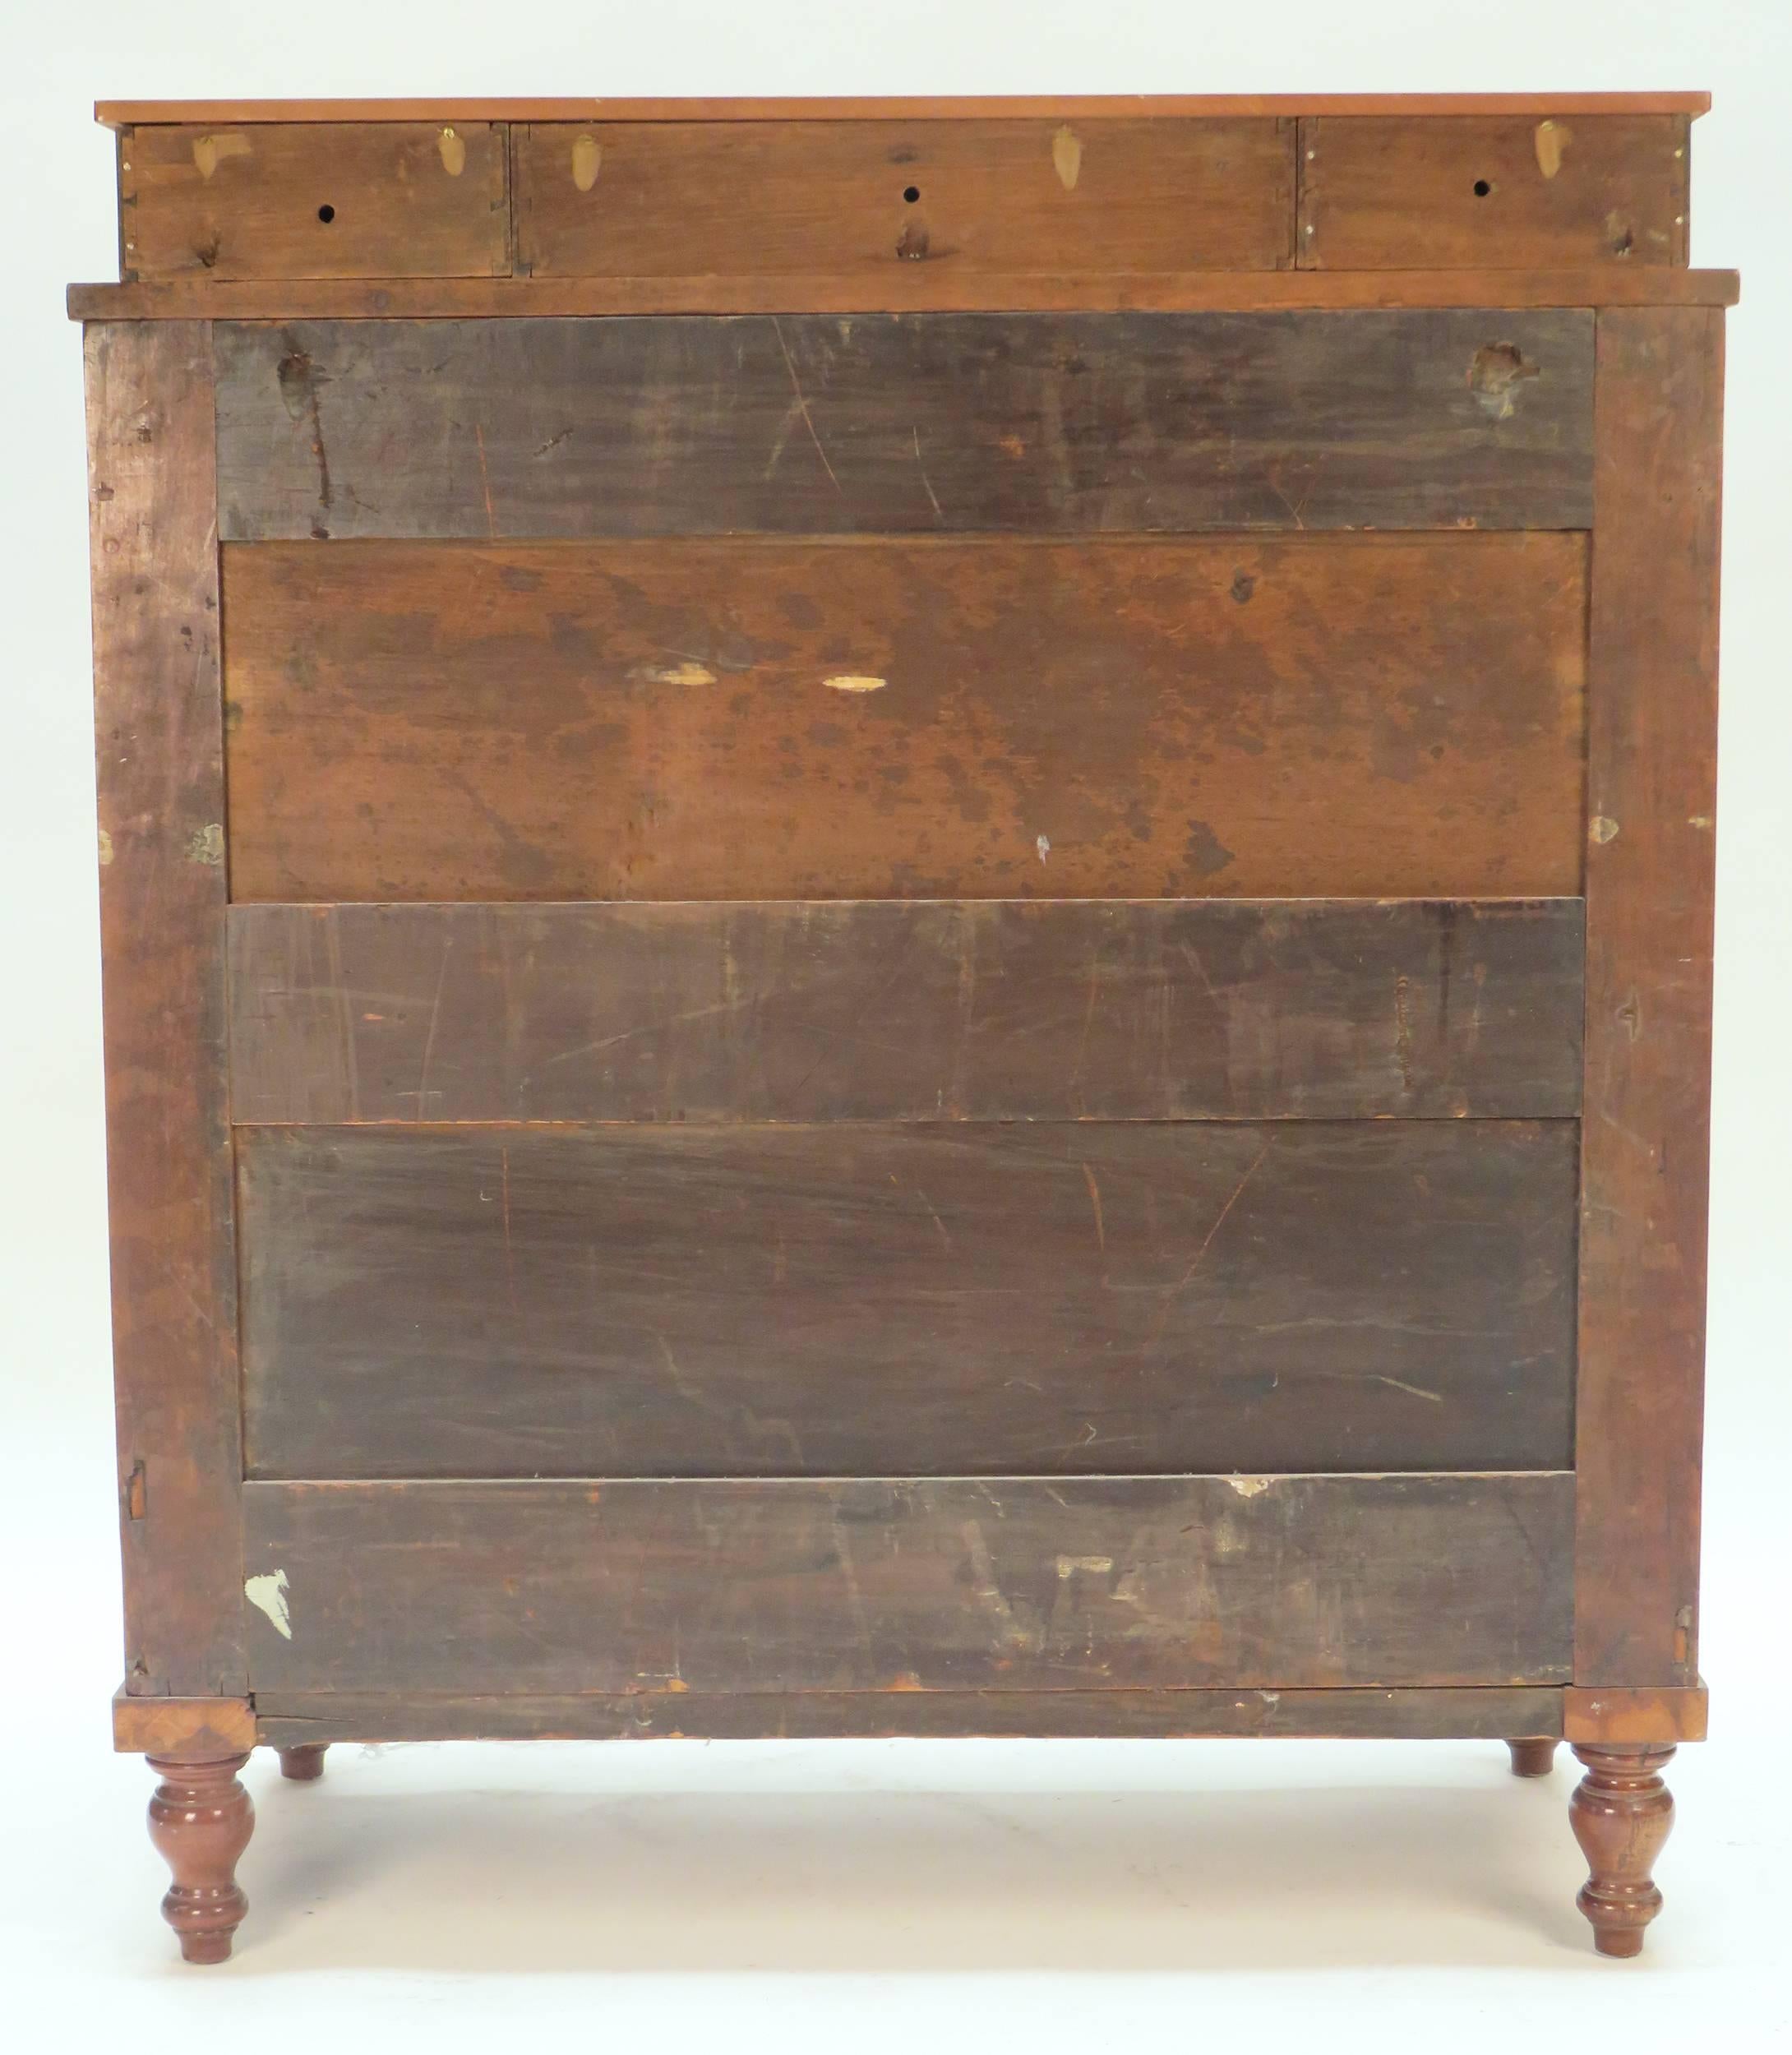 Metal American Empire Chest of Drawers, circa 1840